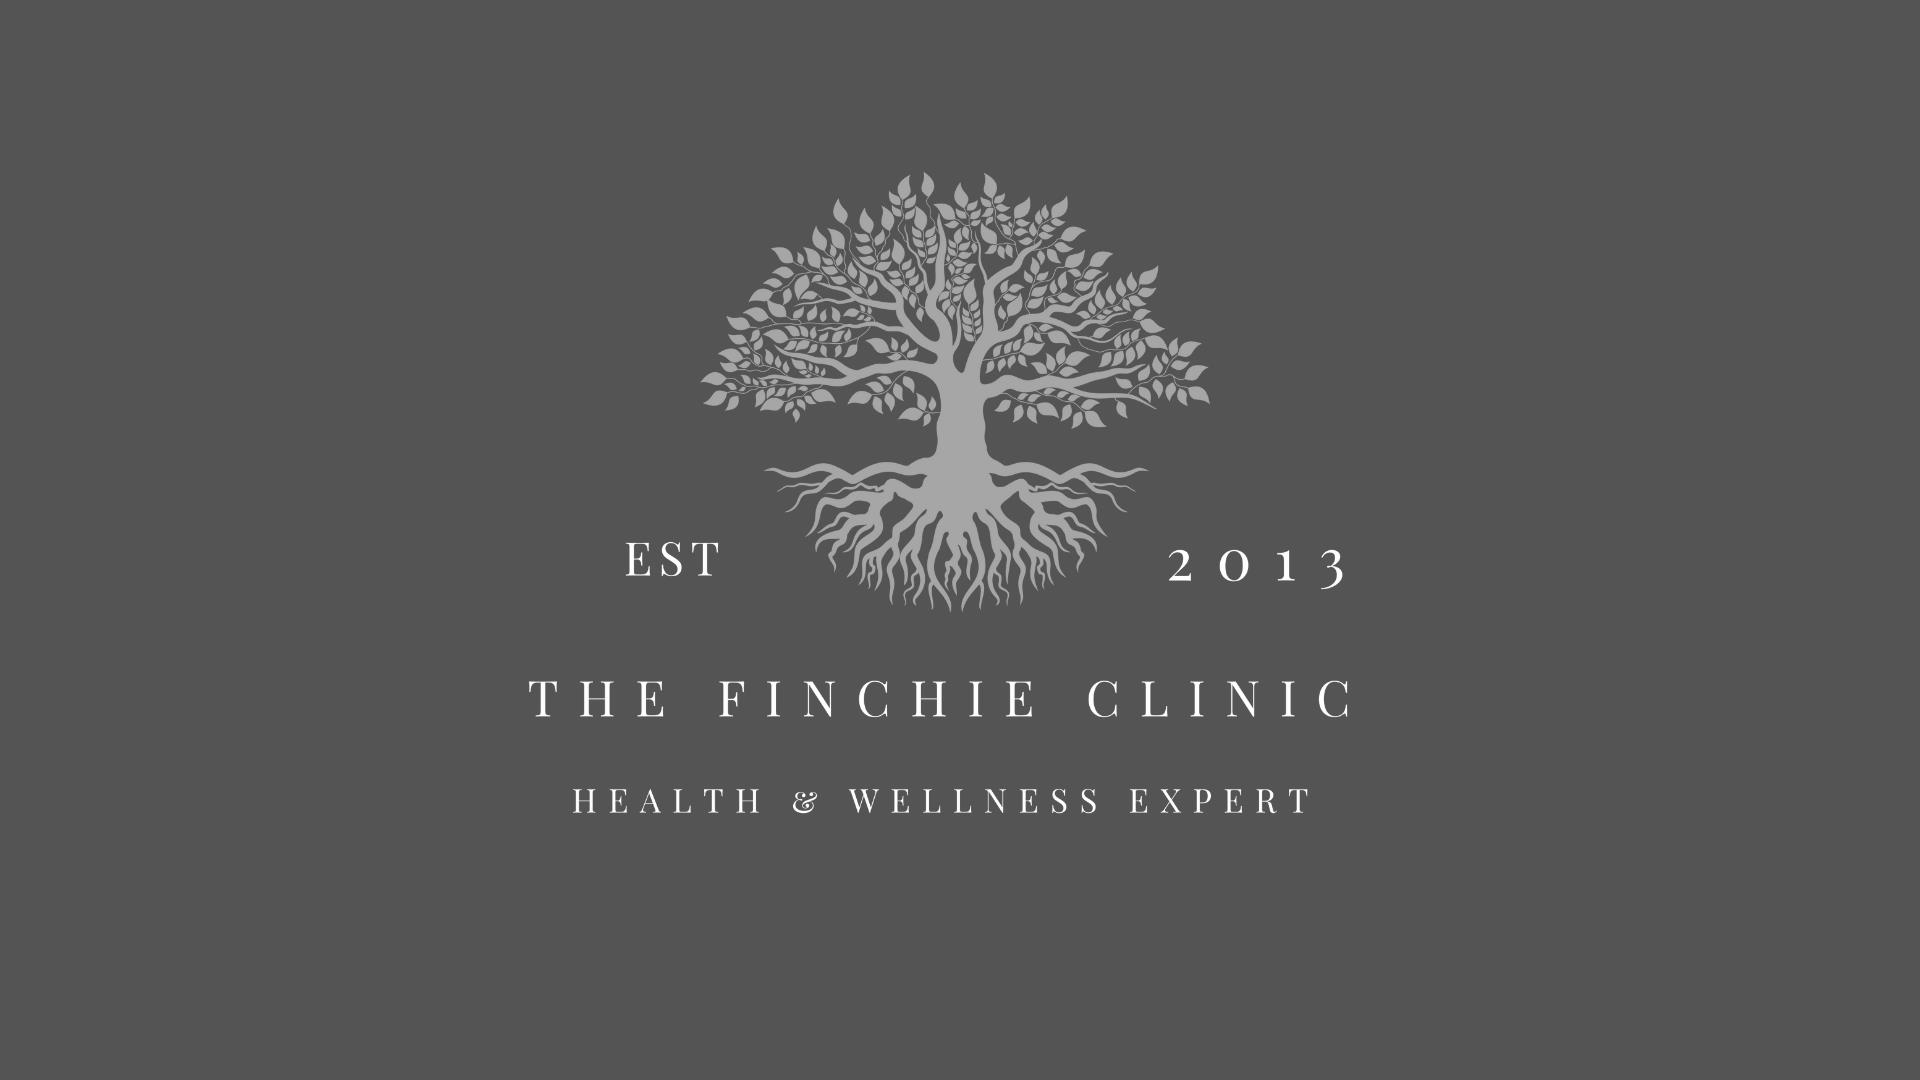 The Finchie Clinic